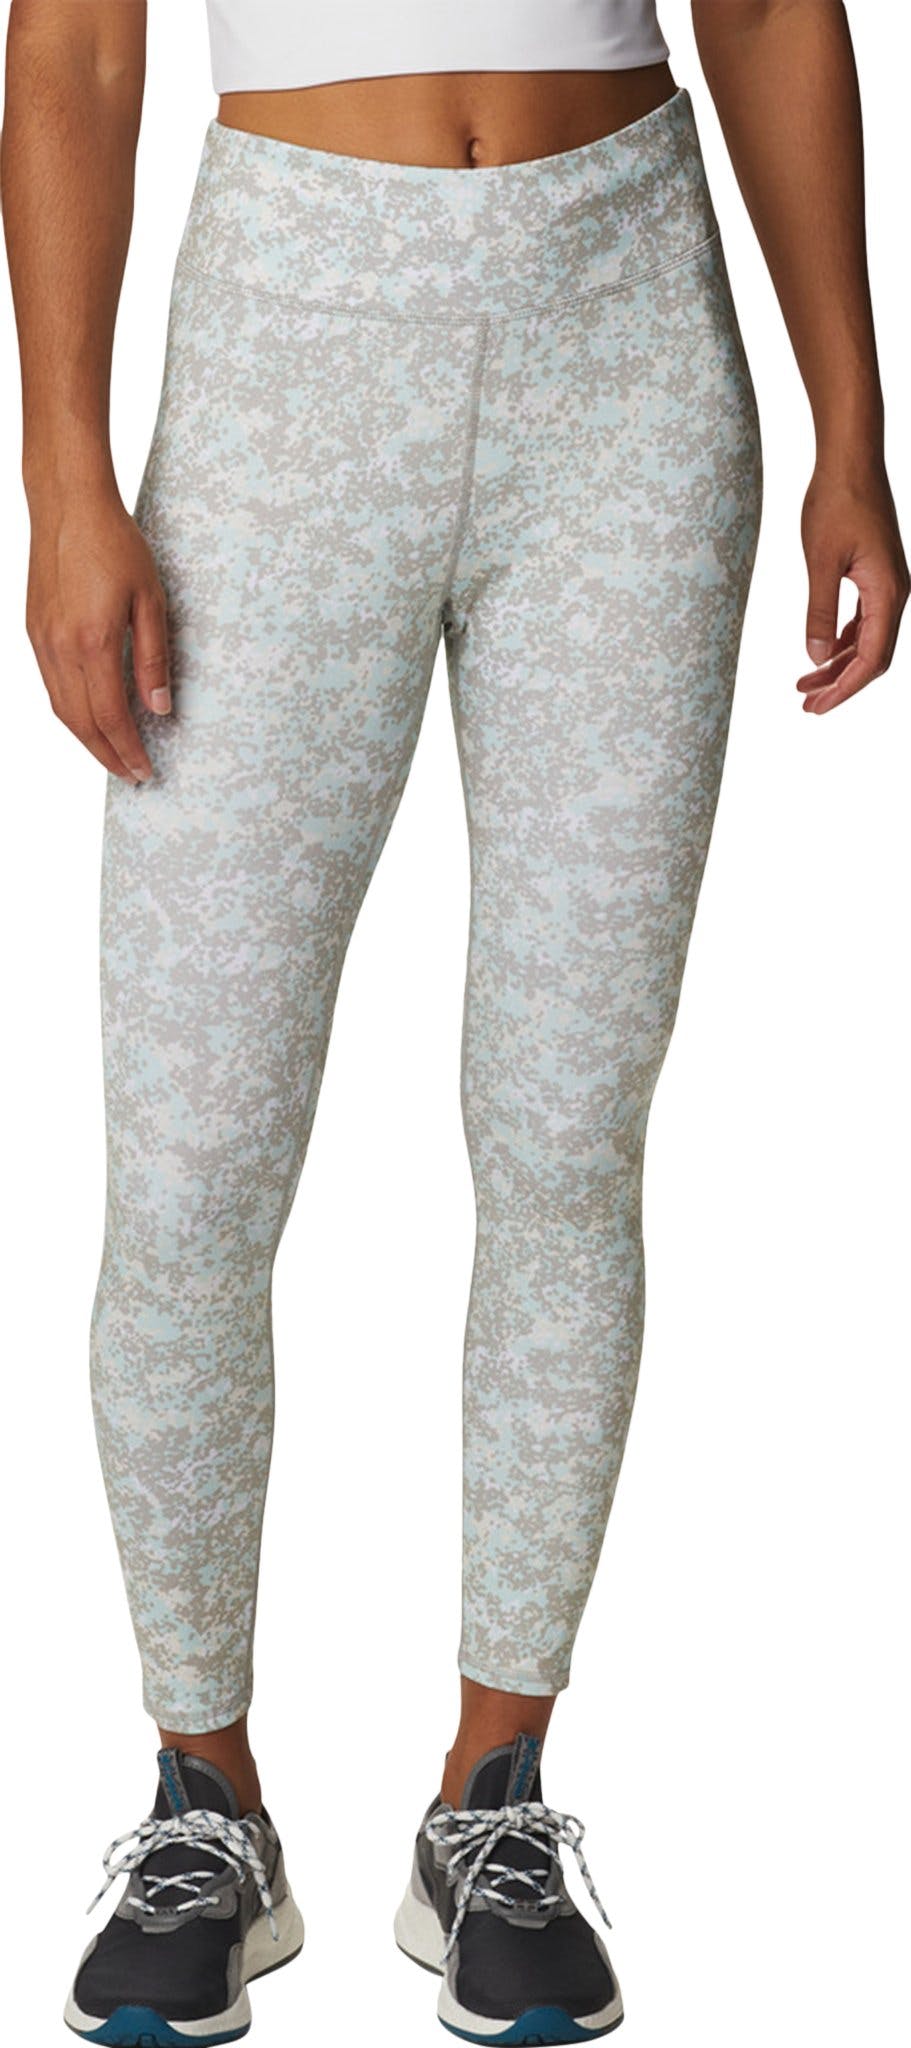 Product image for Columbia Lodge Print 7/8 Tight - Women's